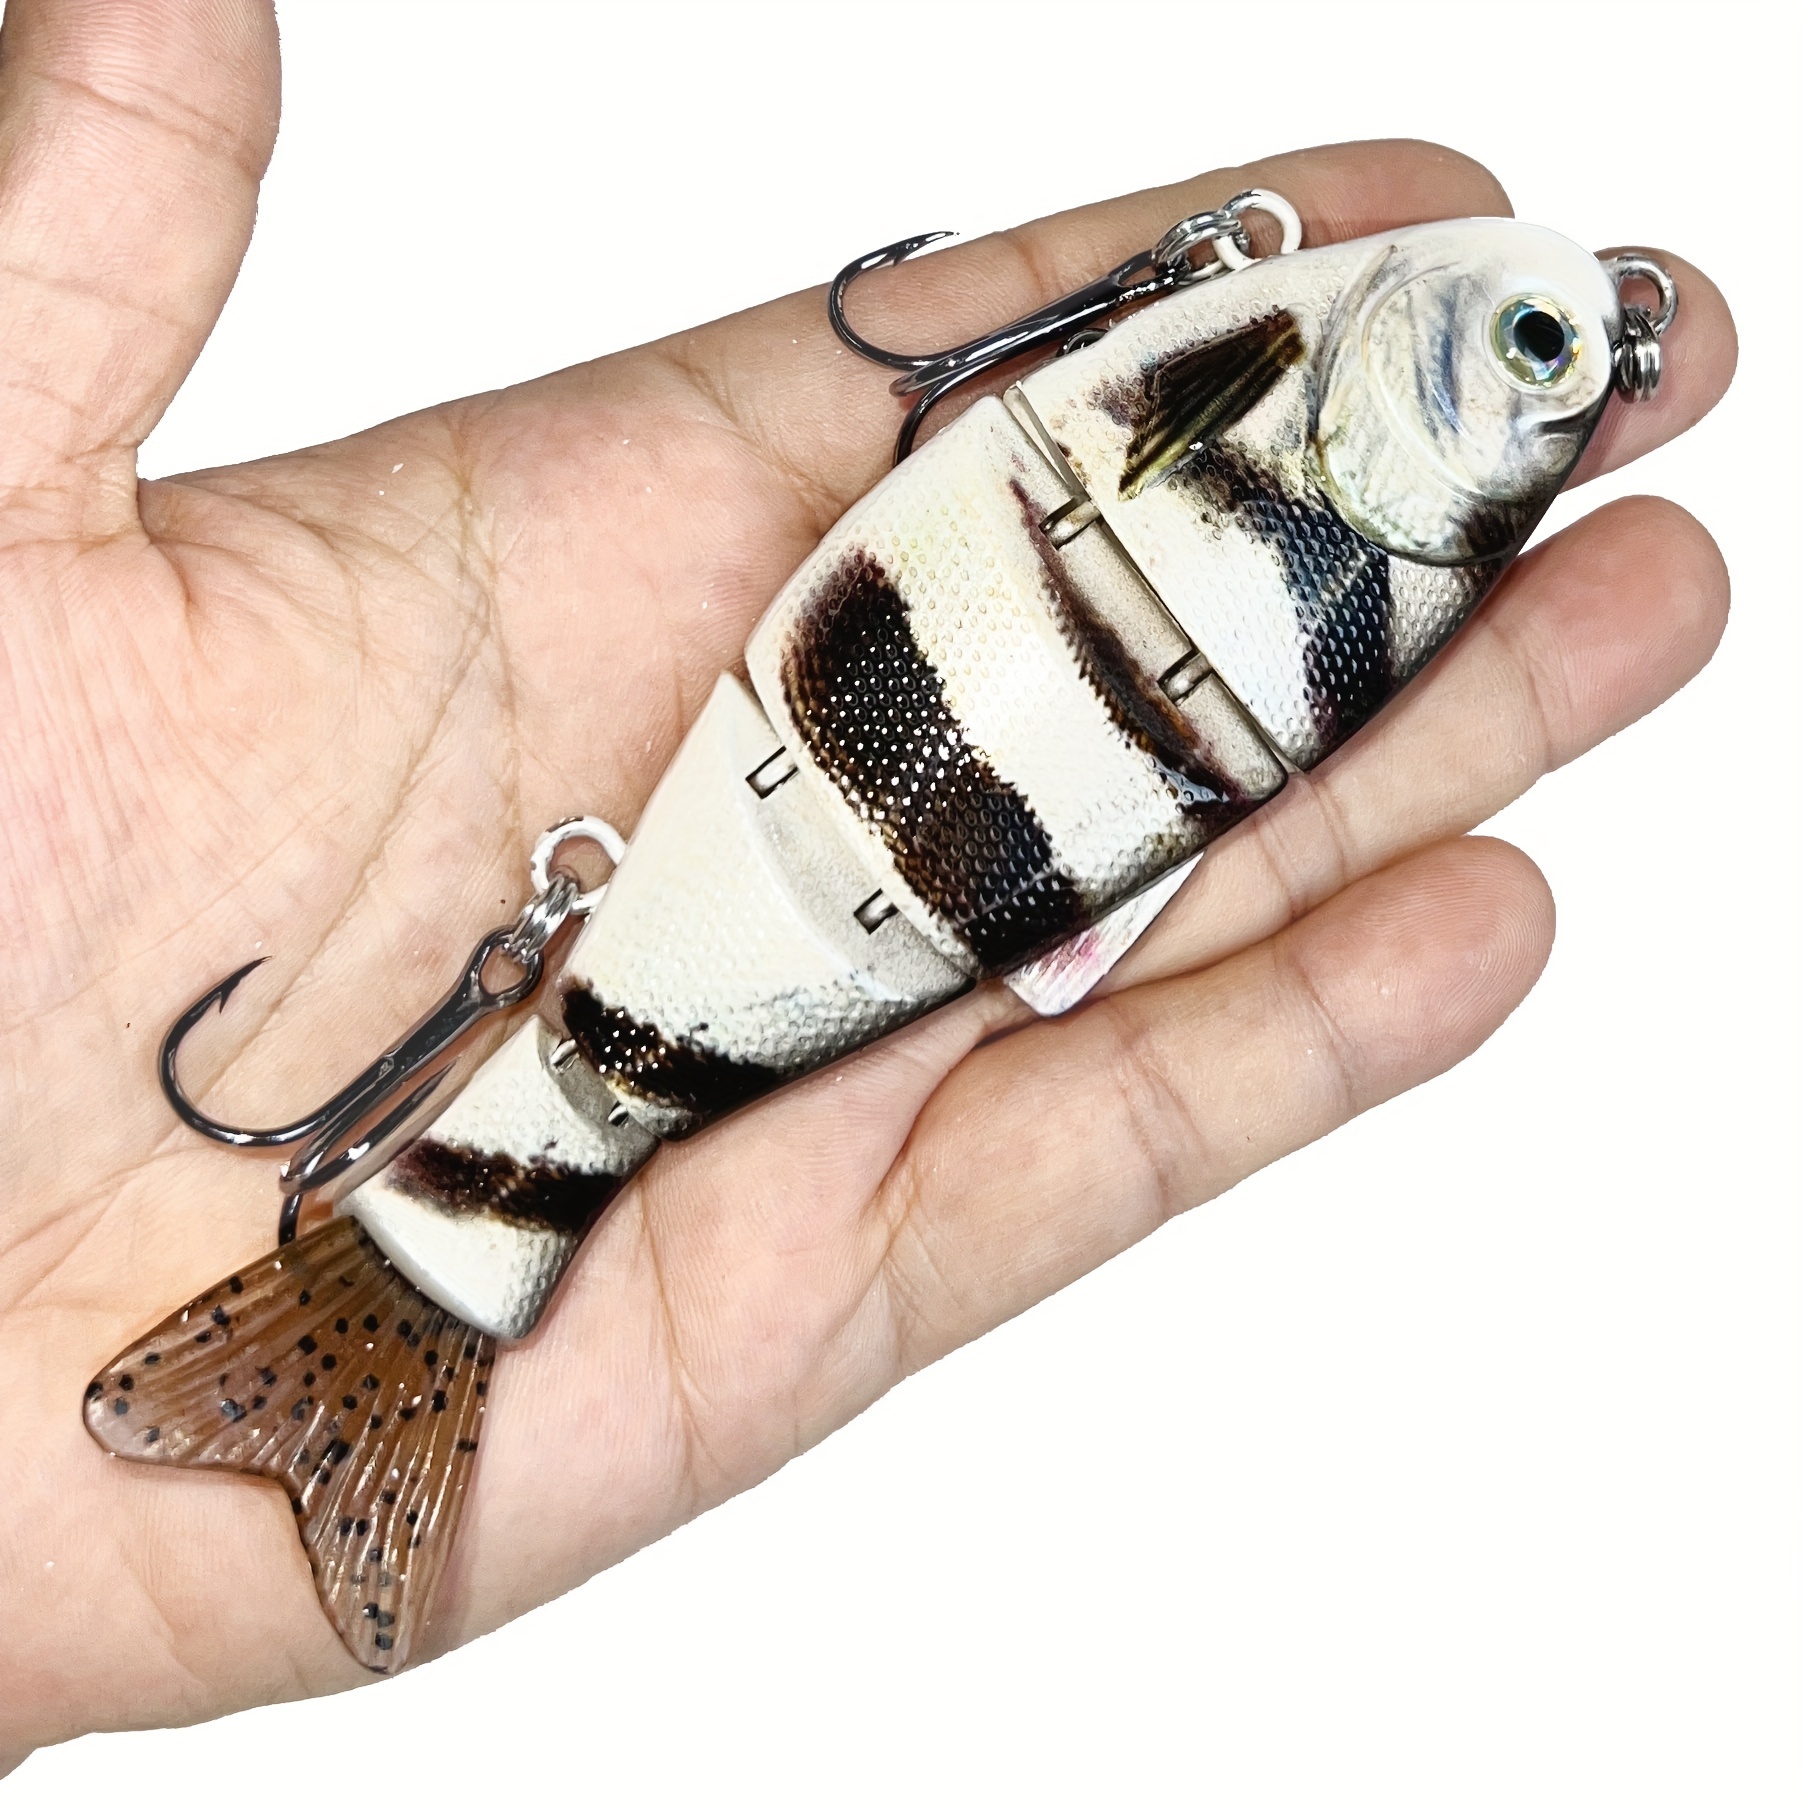  Multi Segments Soft Lures, Soft Lures for Fishing